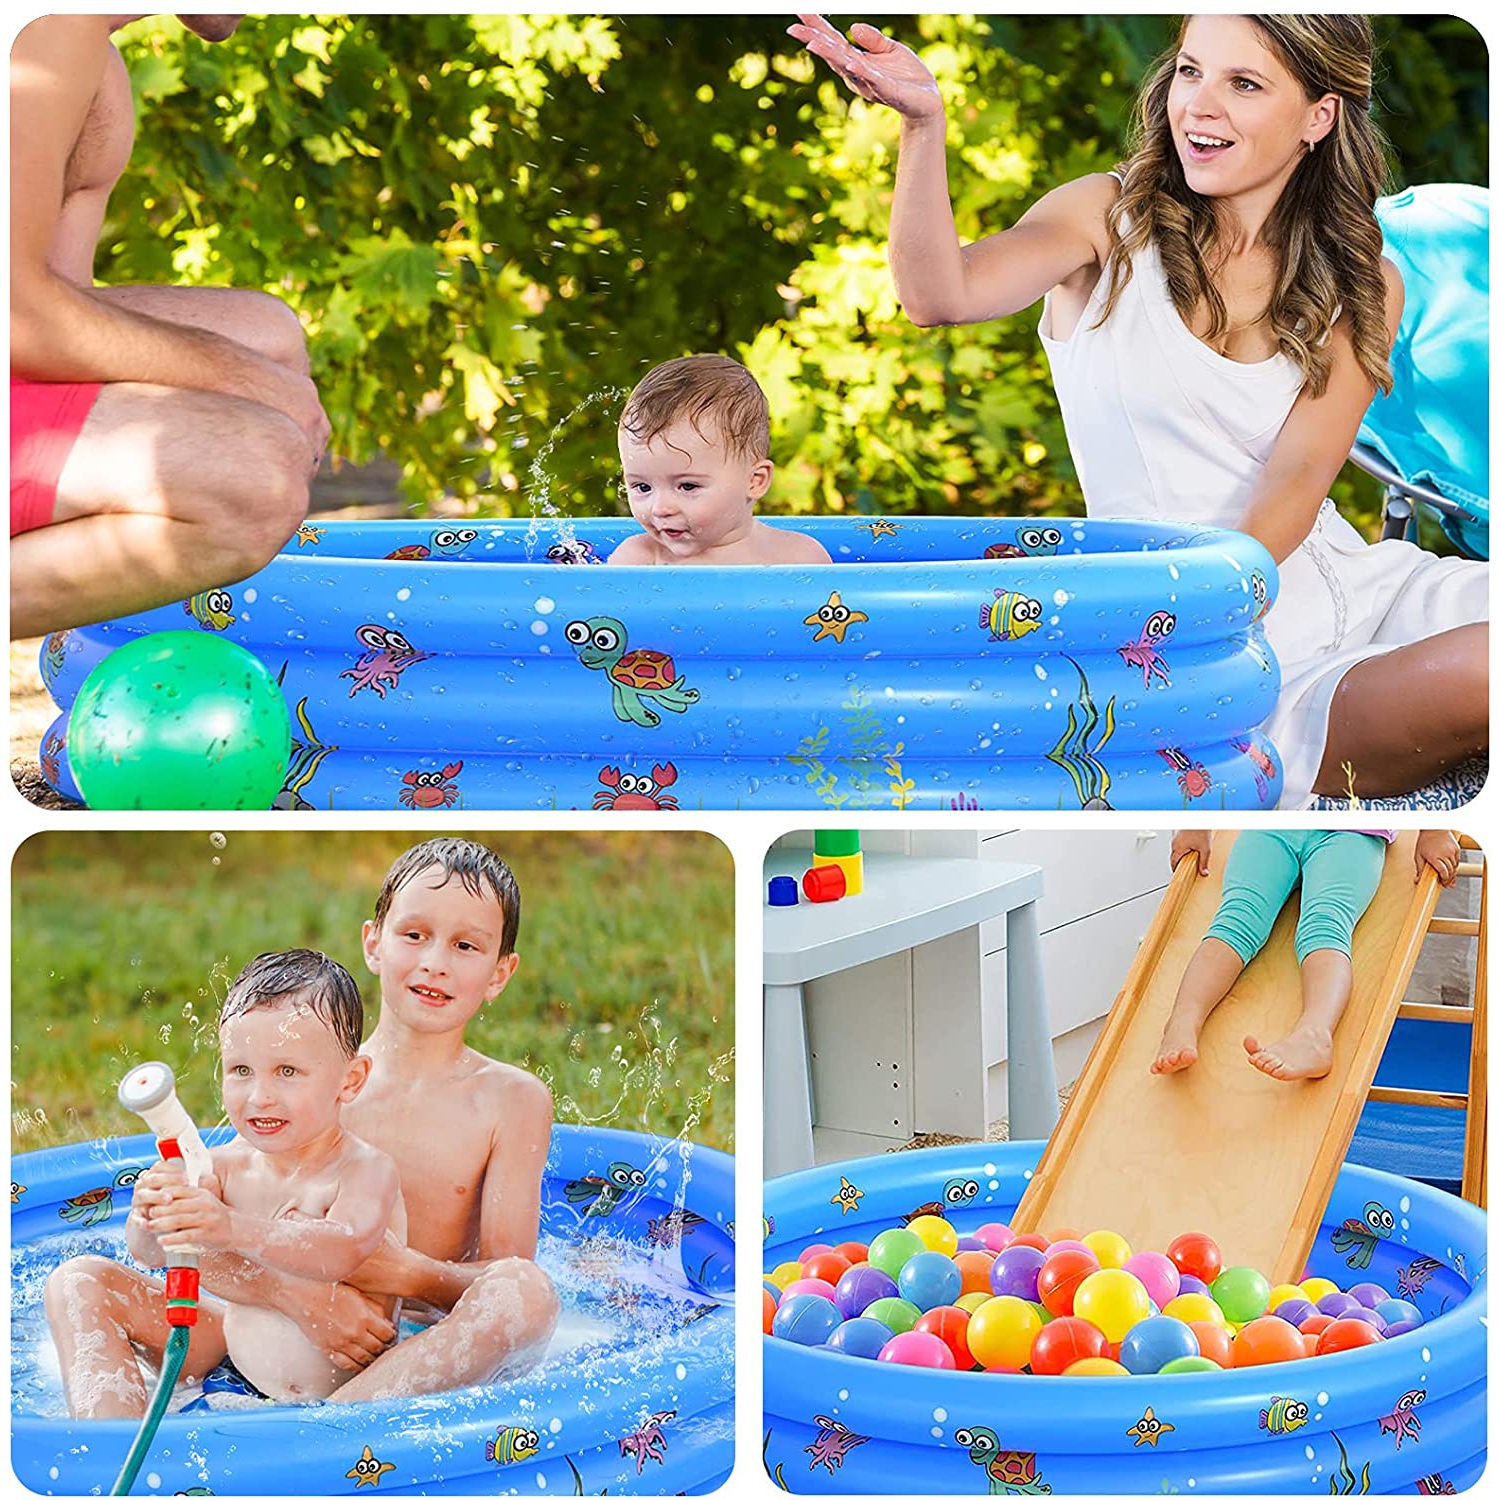  Inflatable Kiddie Pool, Inflatable Pool for Indoor or Outdoor,  59×43×17 Summer Fun Swimming Pool, Kids Pool with Inflatable Soft Floor, Ball  Pit : Toys & Games